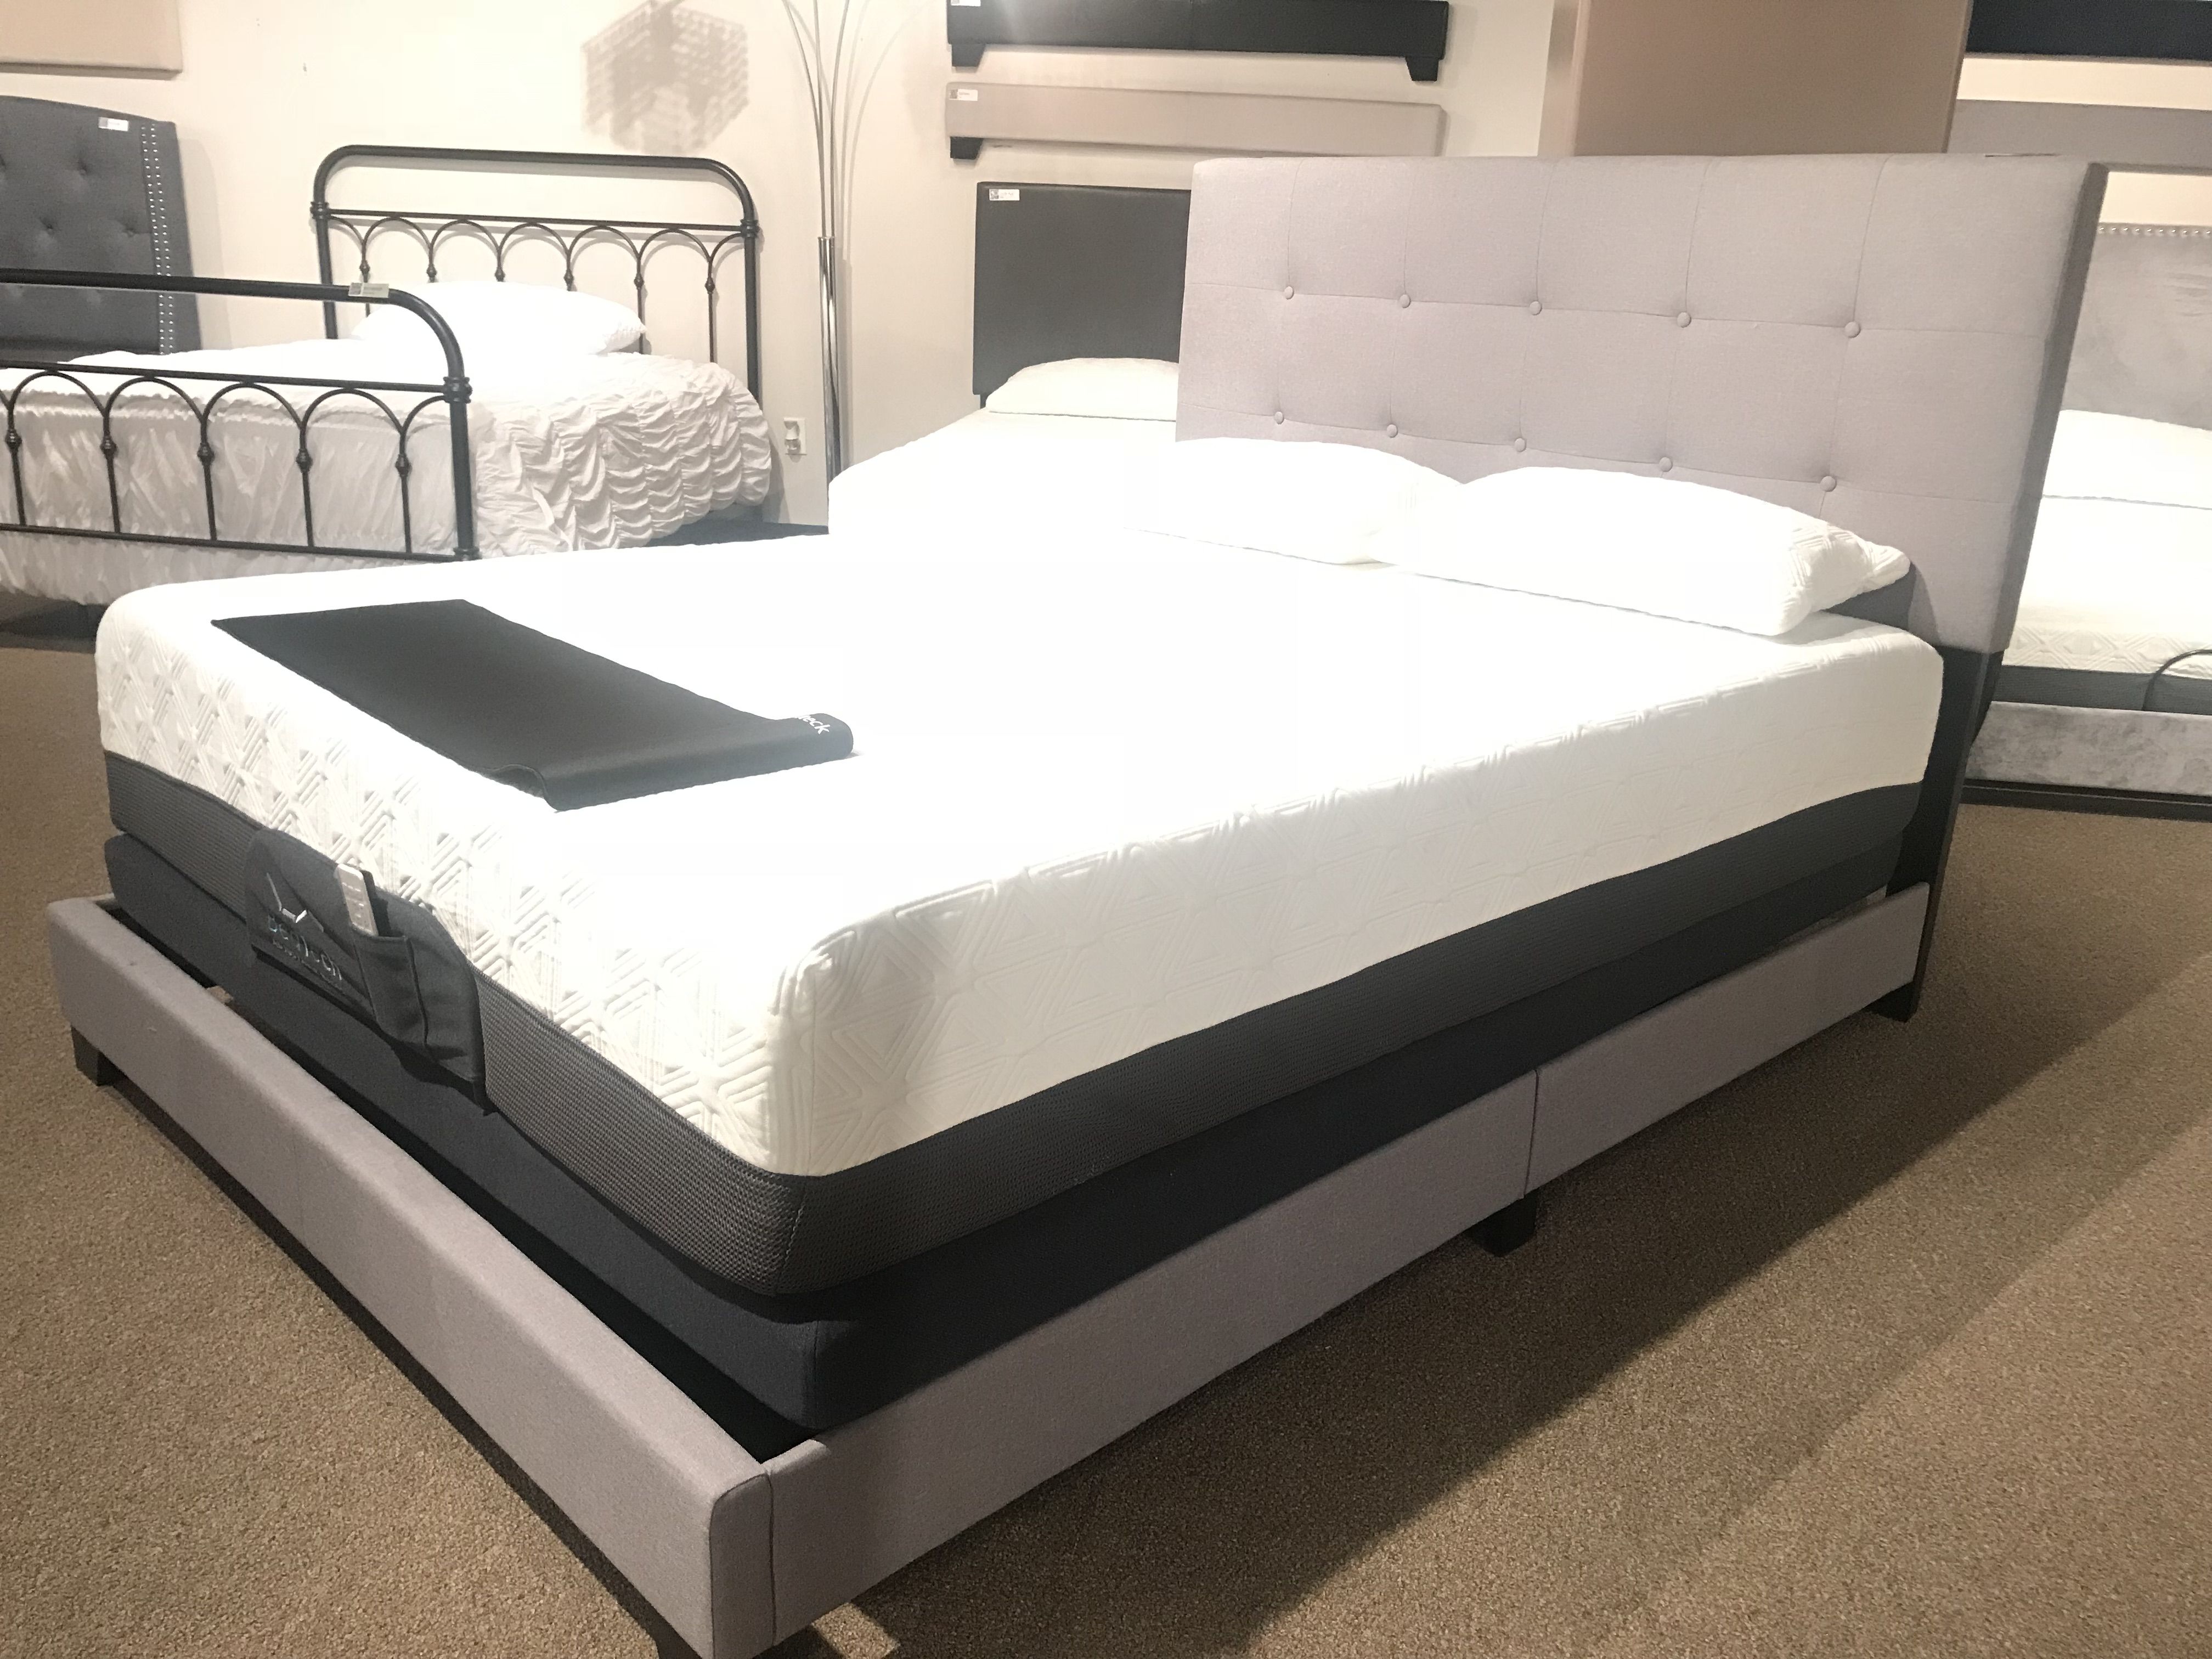 Queen Tufted Bed Frame @ $220 - King Tufted Bed Frame @ $290 - Brand New - one each size left